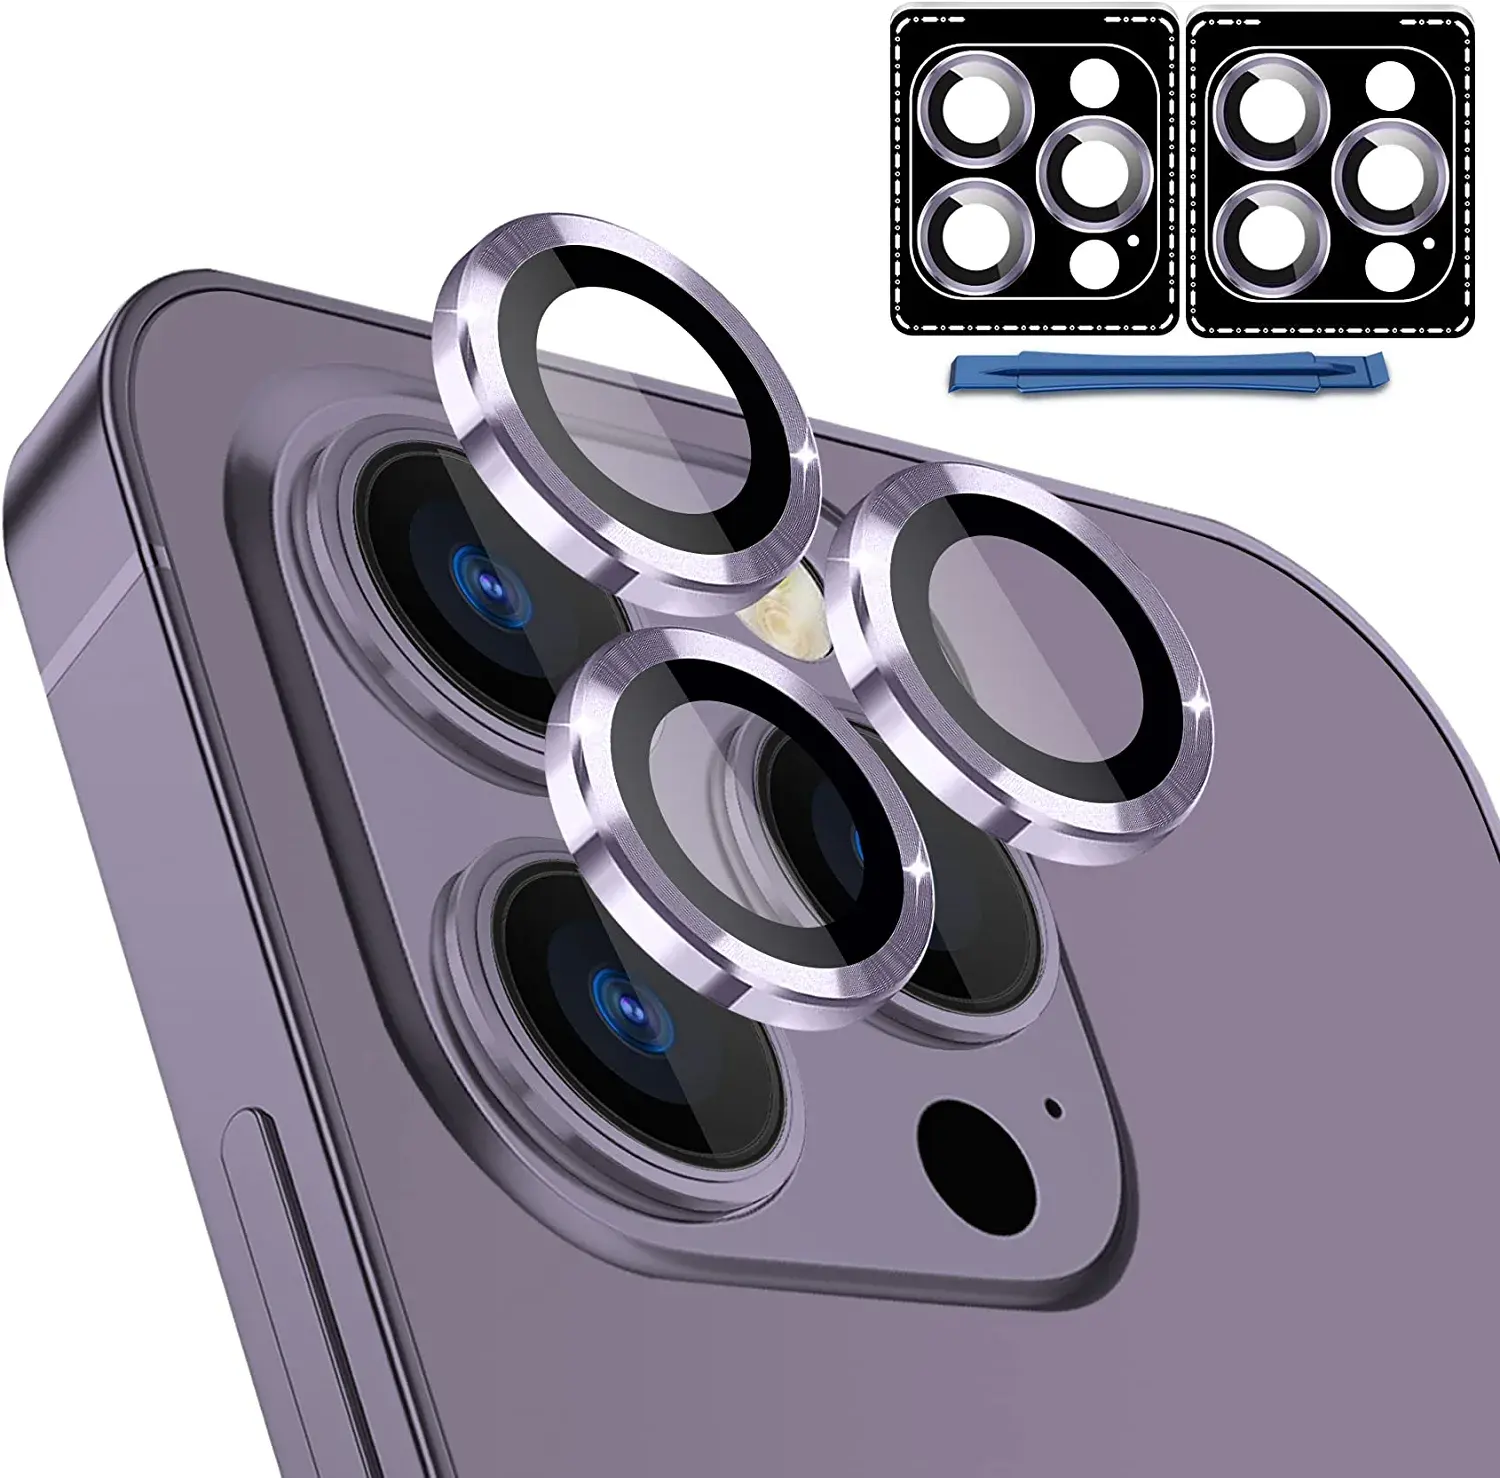 3D Metal Camera Lens Protector for iPhone 14 Pro / 14 Pro Max High Clarity Scratch Proof 9H Camera Lens Cover Aluminum Circle